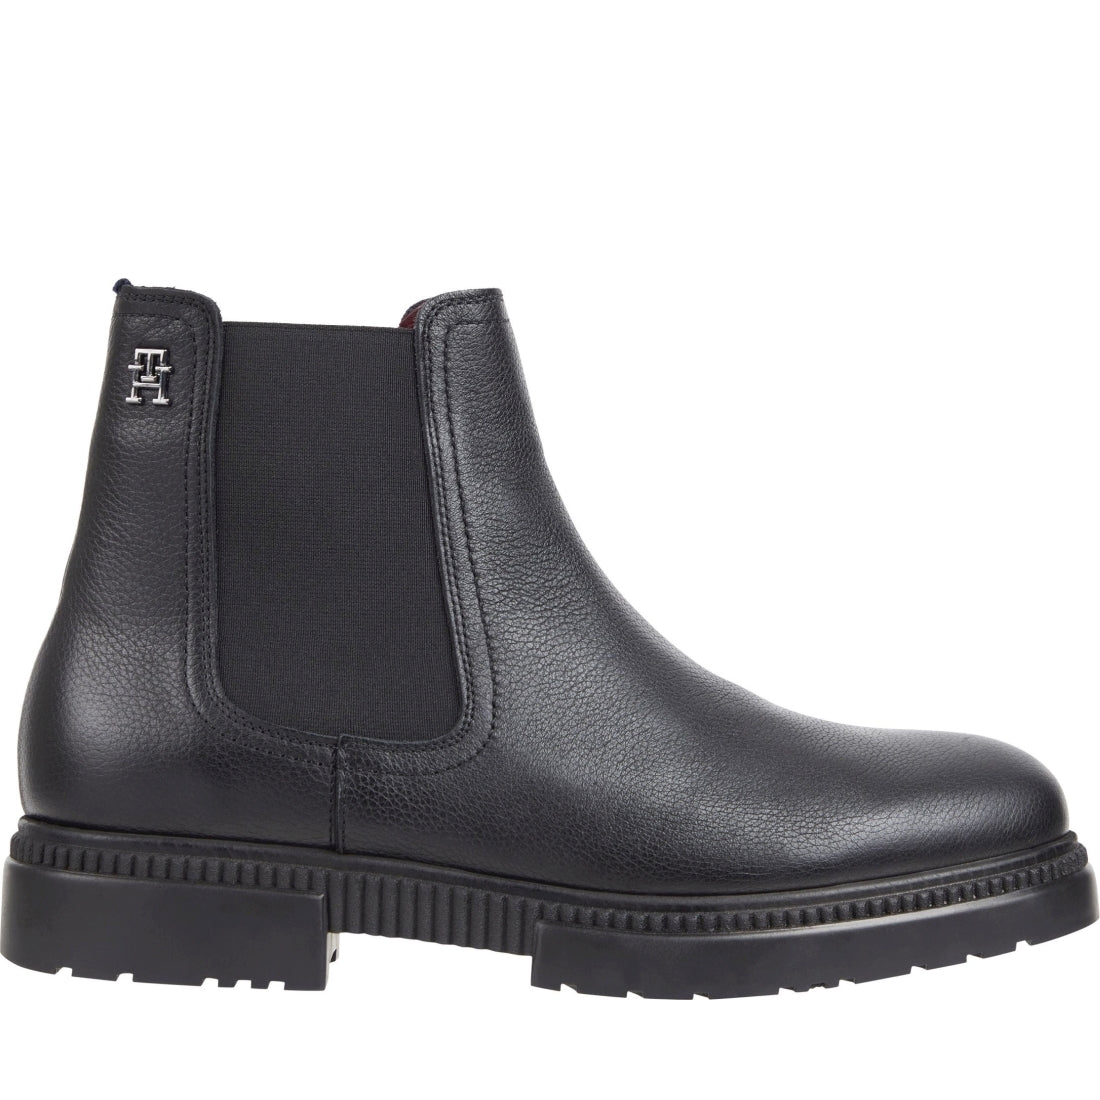 Tommy Hilfiger mens black comfort cleated thermo booties | Vilbury London